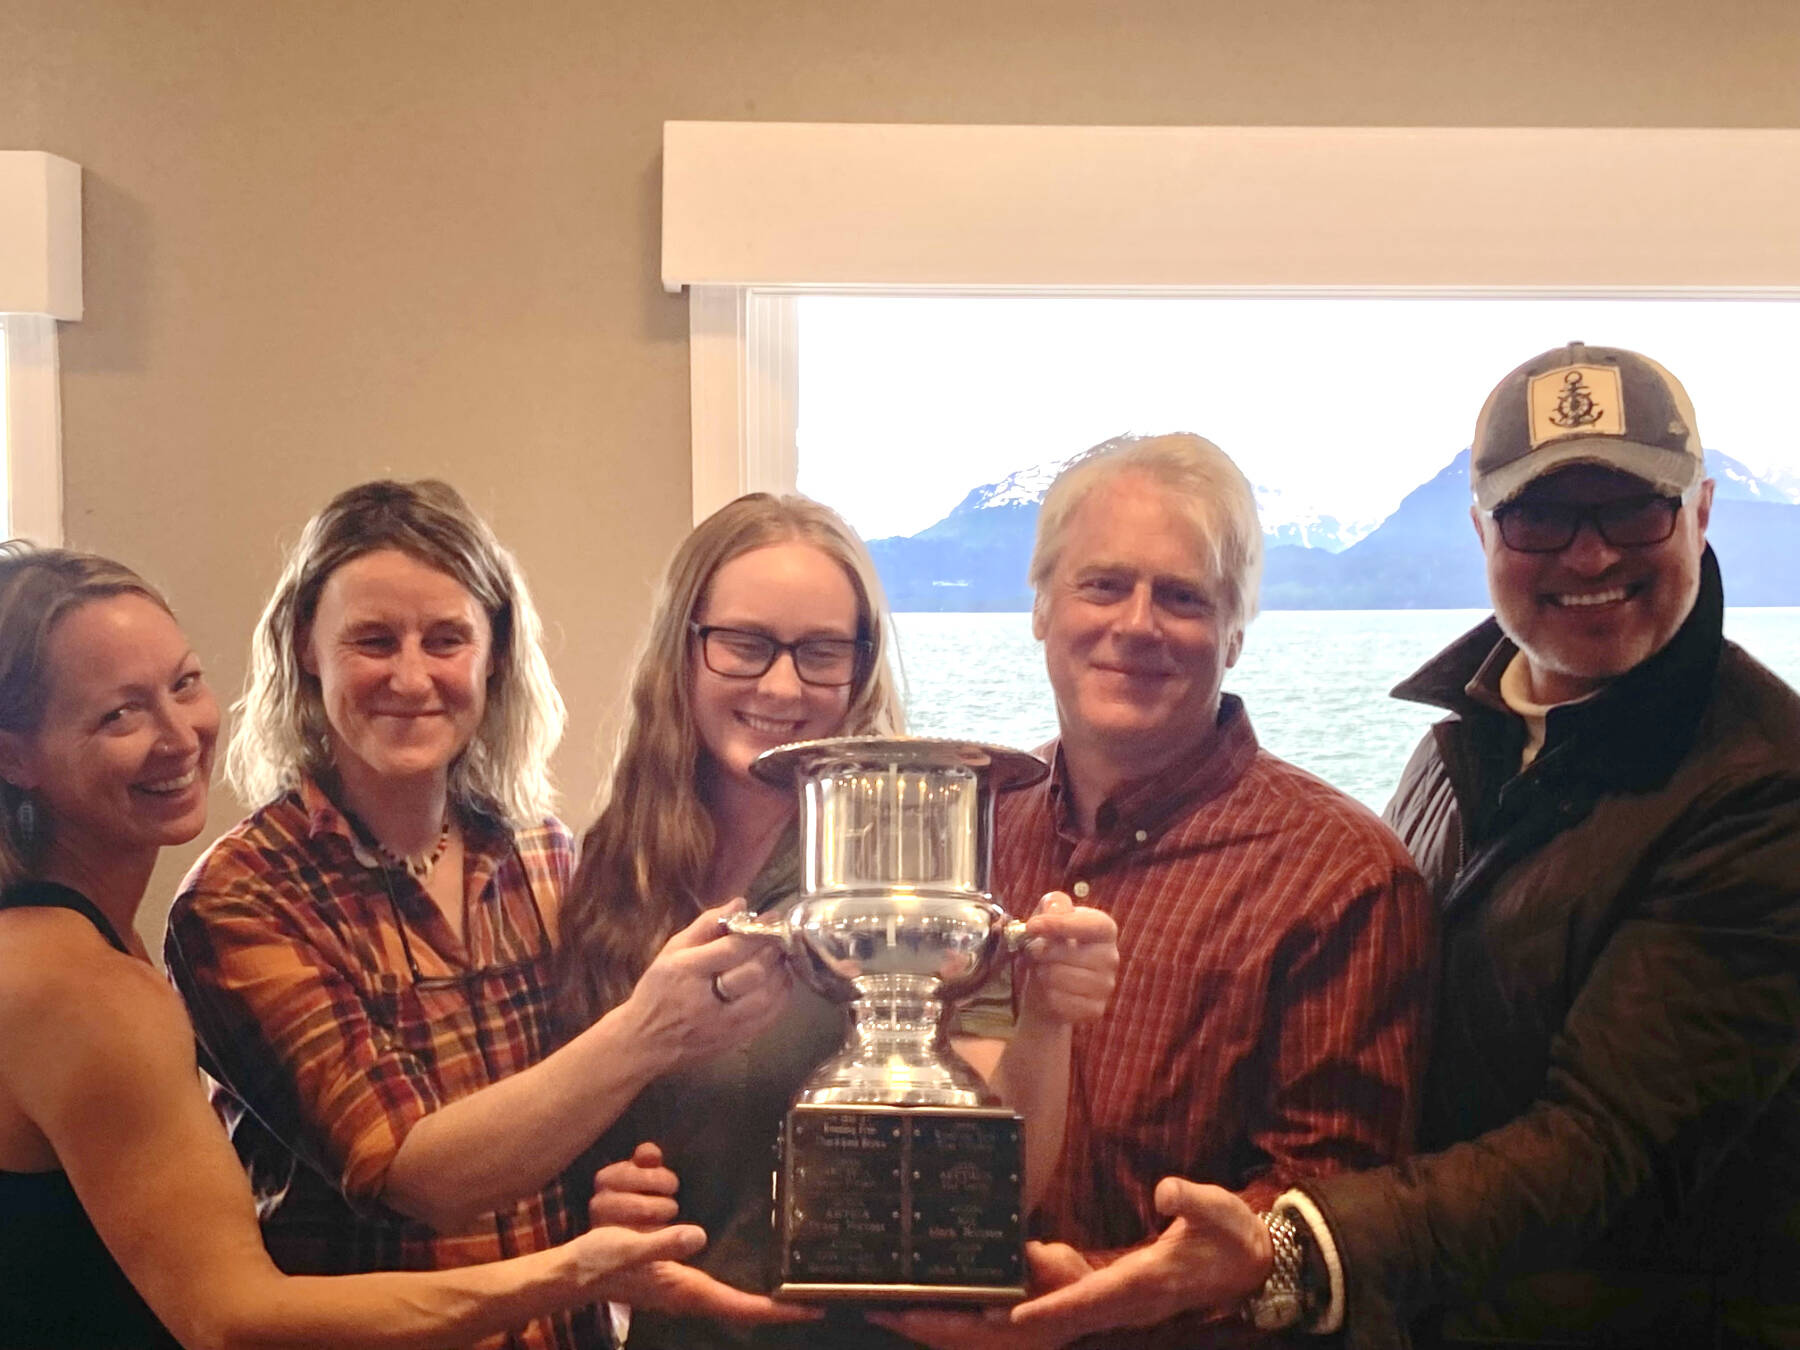 Erik Pullman (fourth from left), winner of the 2023 Homer Yacht Club Land’s End Regatta, is photographed during the awards ceremony at Land’s End Resort on Sunday, June 25, 2023 in Homer, Alaska. Photo courtesy of Laurie Gentle